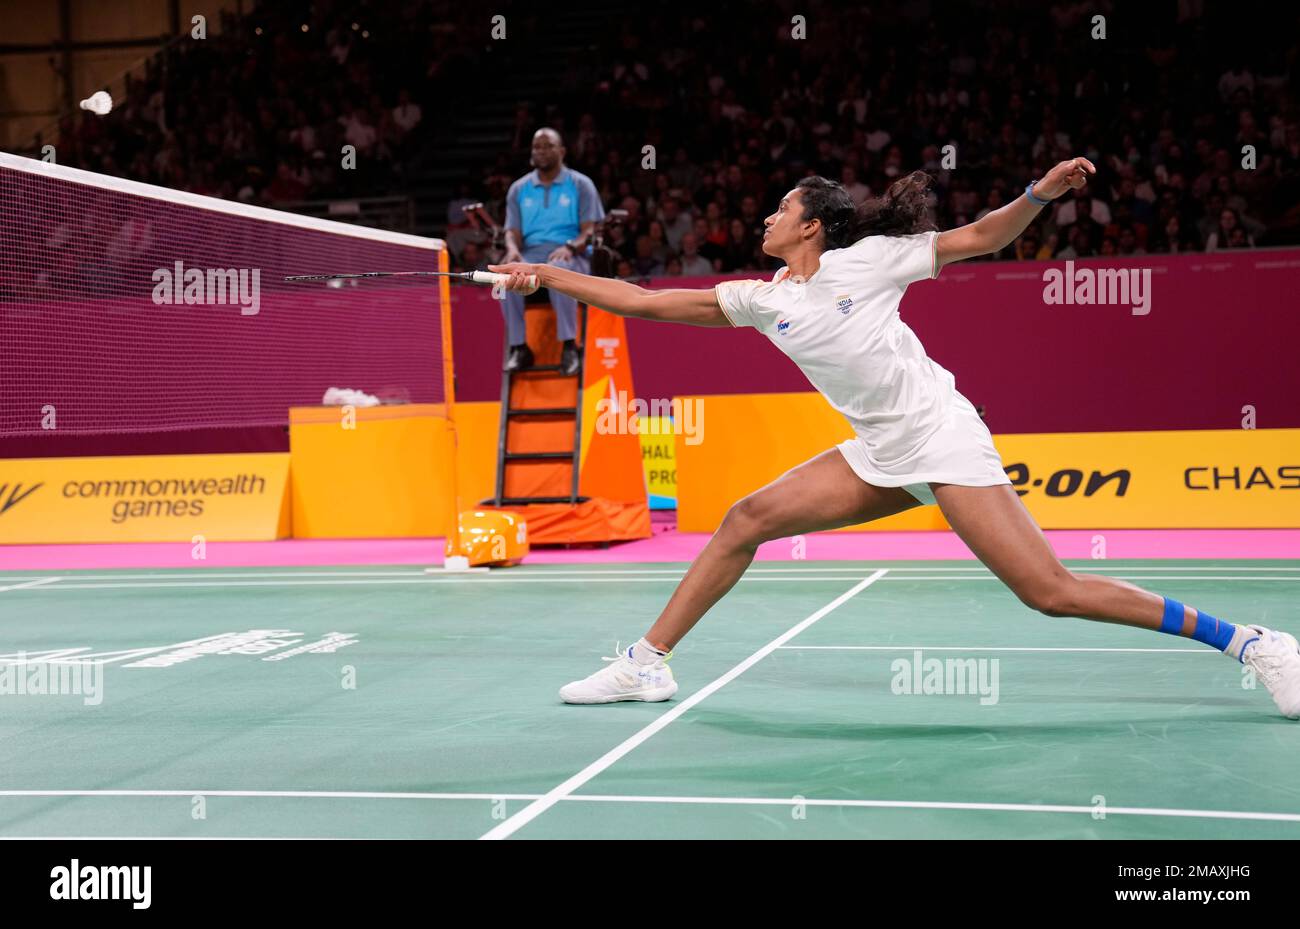 Indias Venkata Sindhu Pusarla plays a return to Canadas Michelle Li during their Womens single gold medal badminton match at the Commonwealth Games in Birmingham, England, Monday, Aug